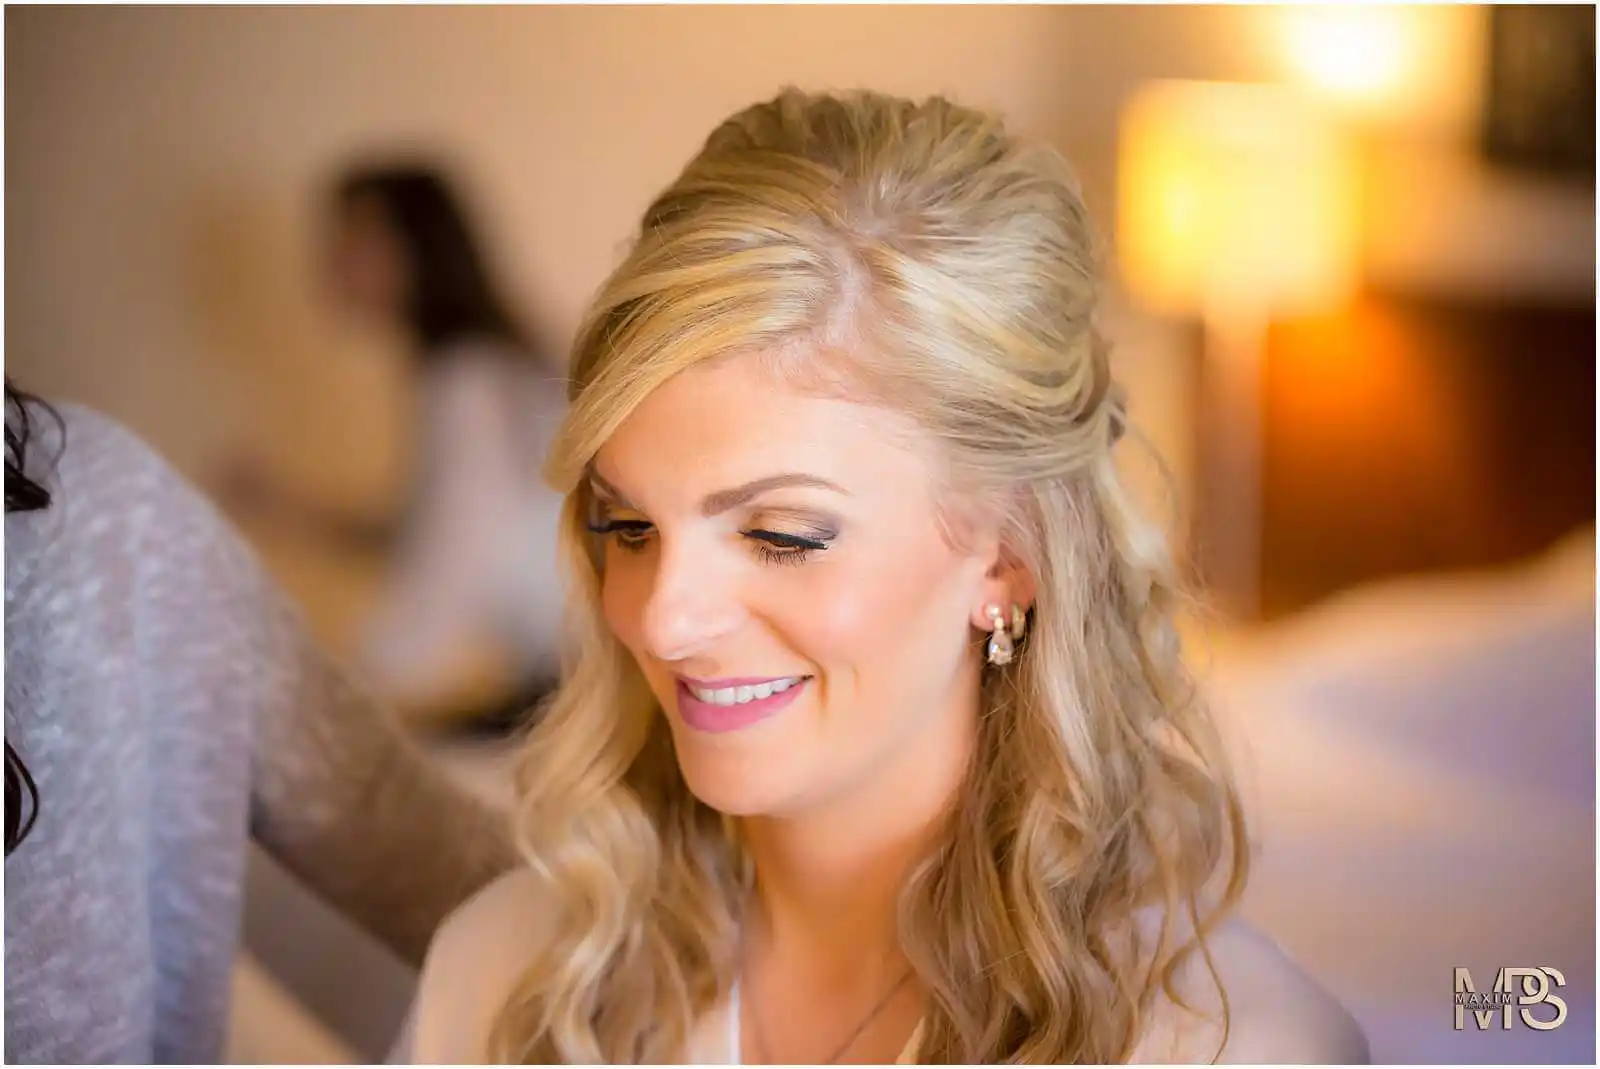 Happy blonde woman with elegant hairstyle smiling indoors at The Grand Covington KY